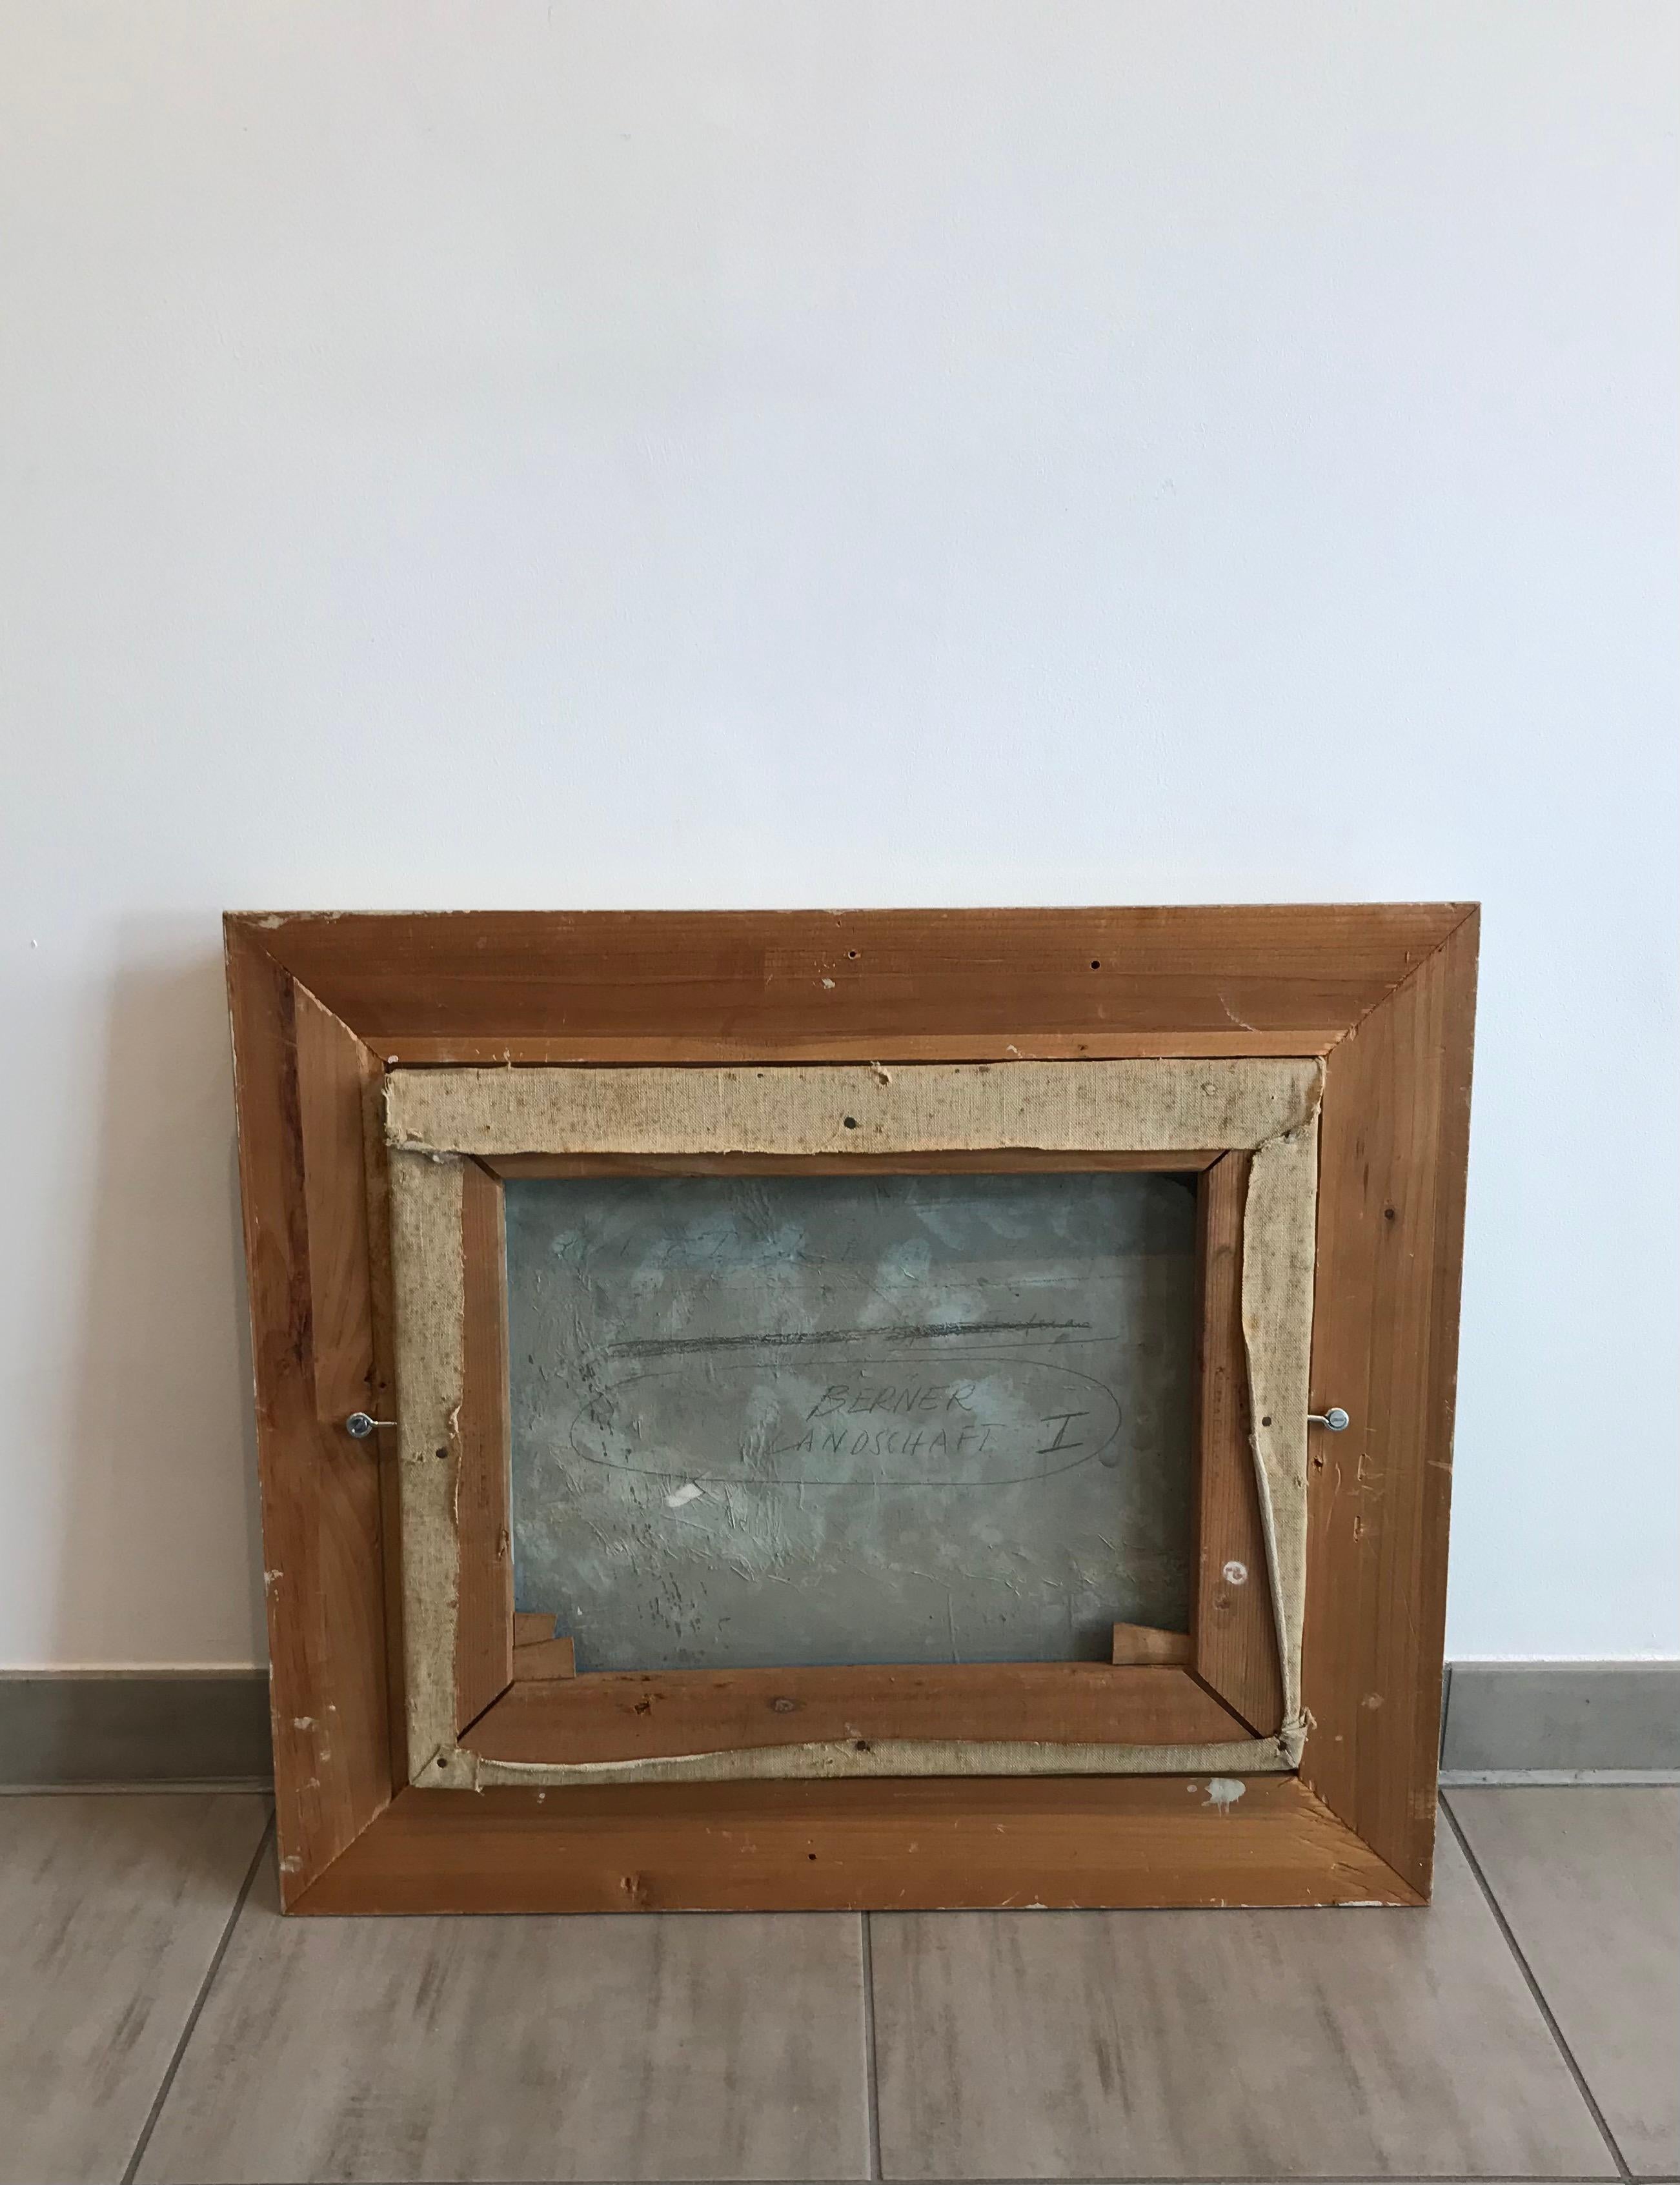 Work on canvas
Gray wooden frame
47,5 x 55,5 x 4,5 cm